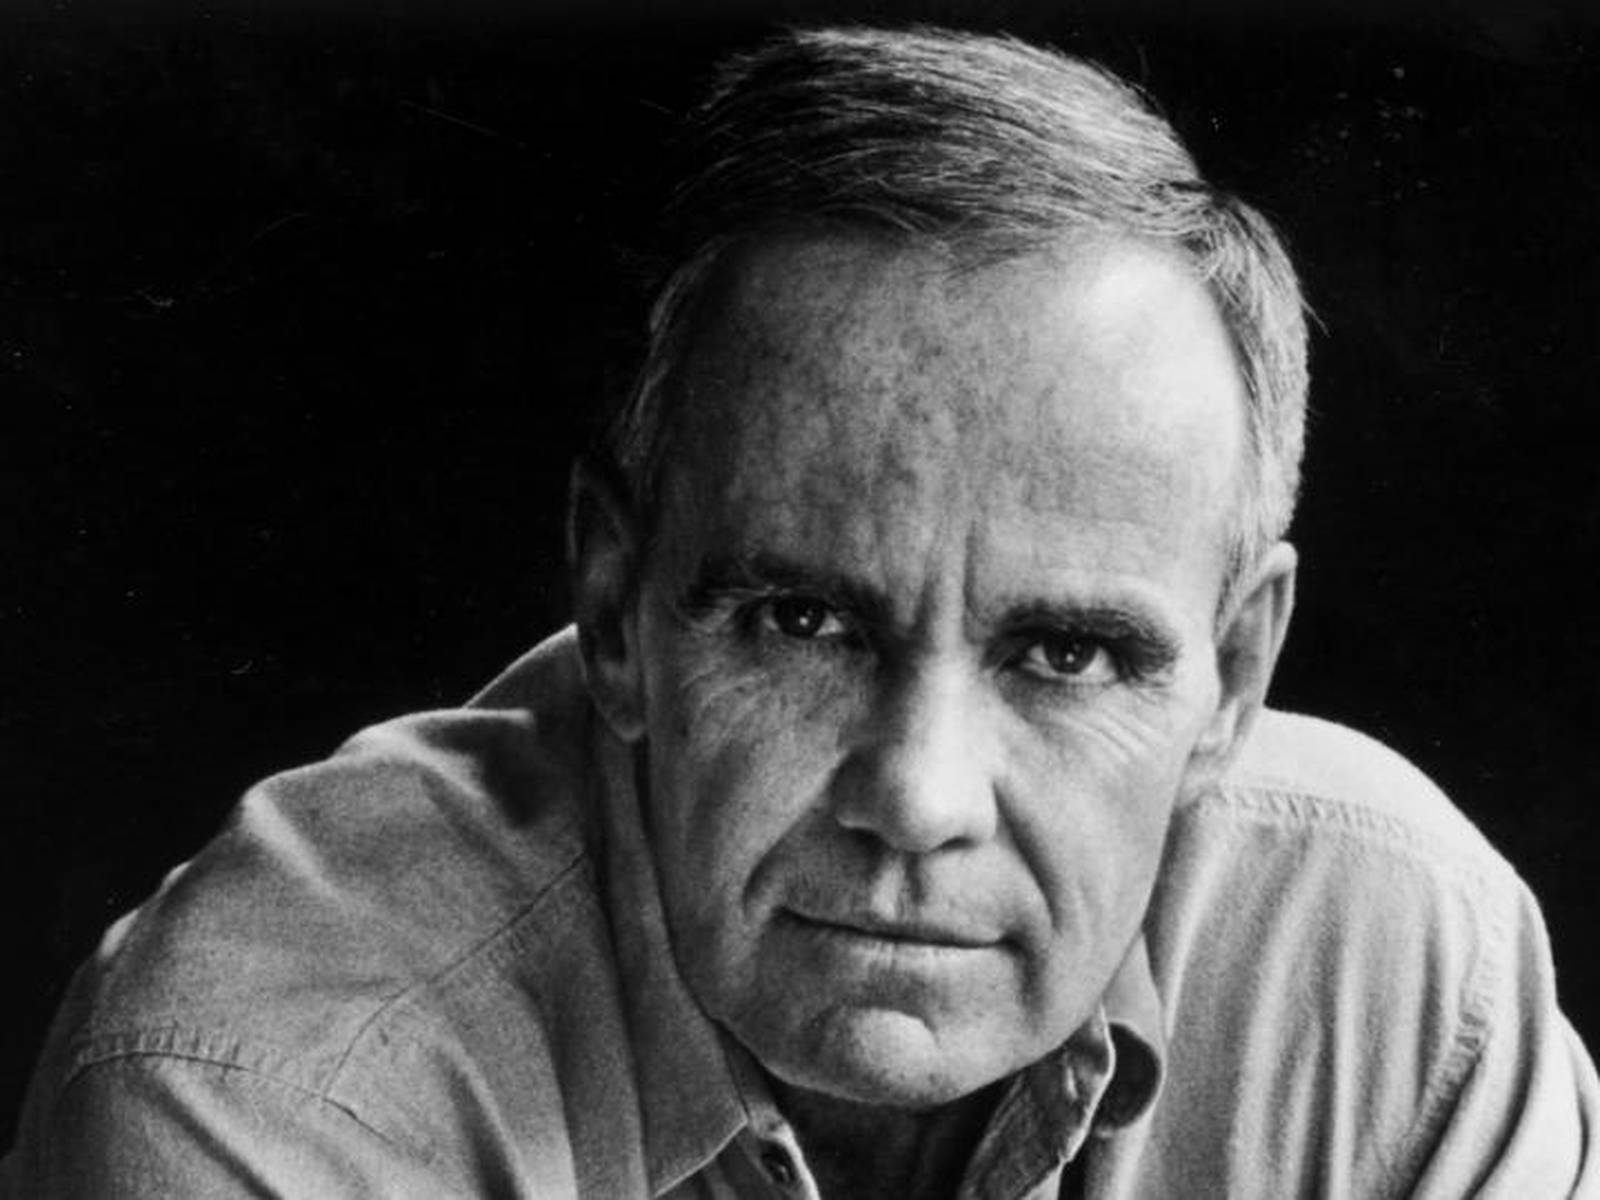 Cormac McCarthy, lauded author of 'The Road' and 'No Country for Old Men,'  dies at 89